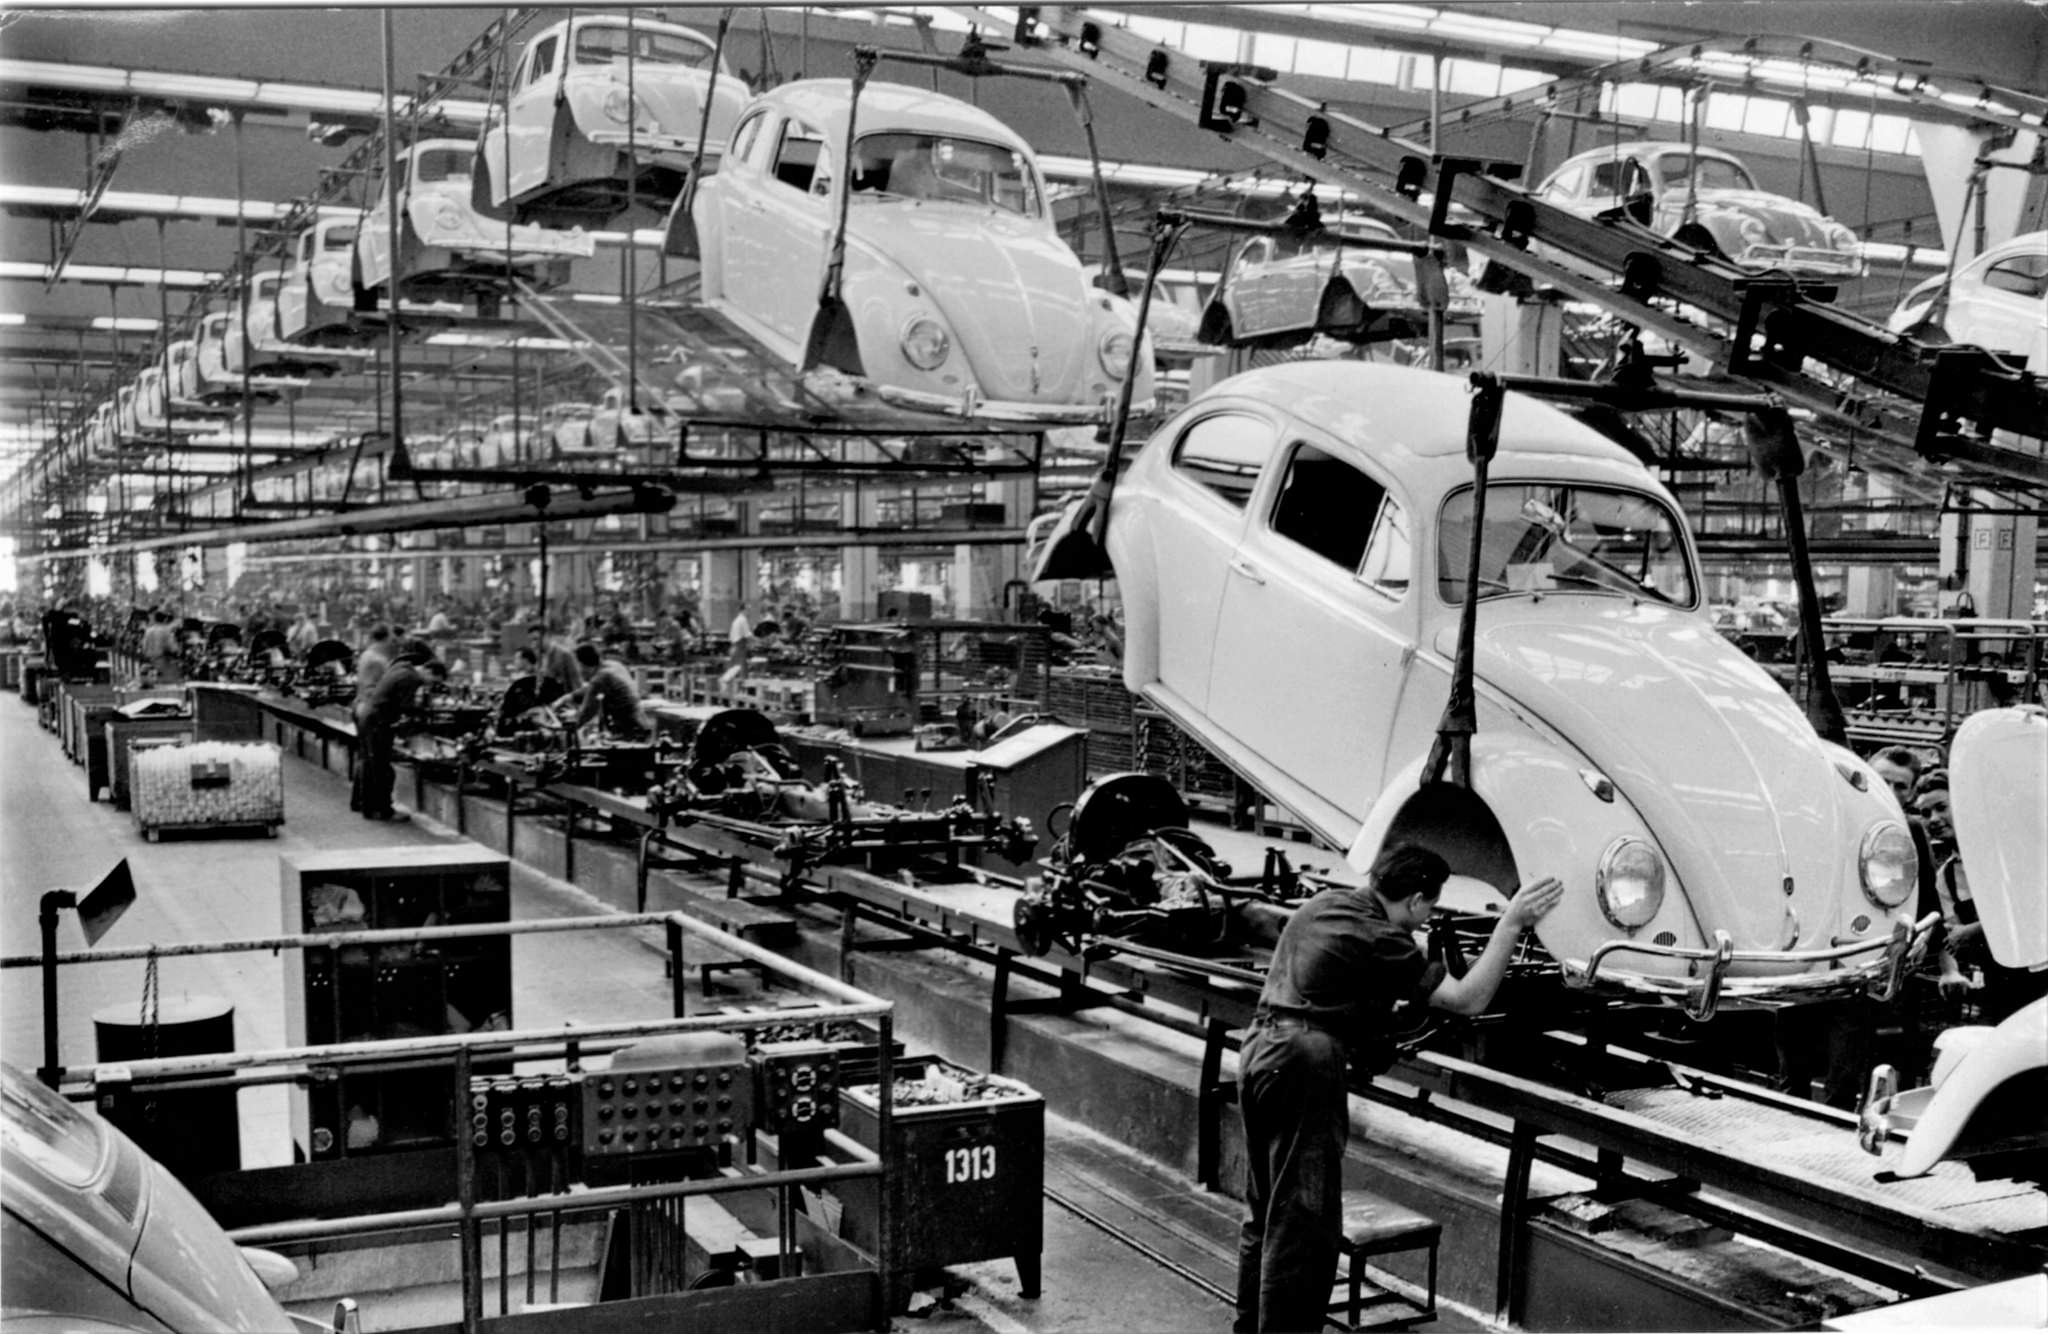 Clean, tidy, and efficient. This is a volkswagen beetle assembly line